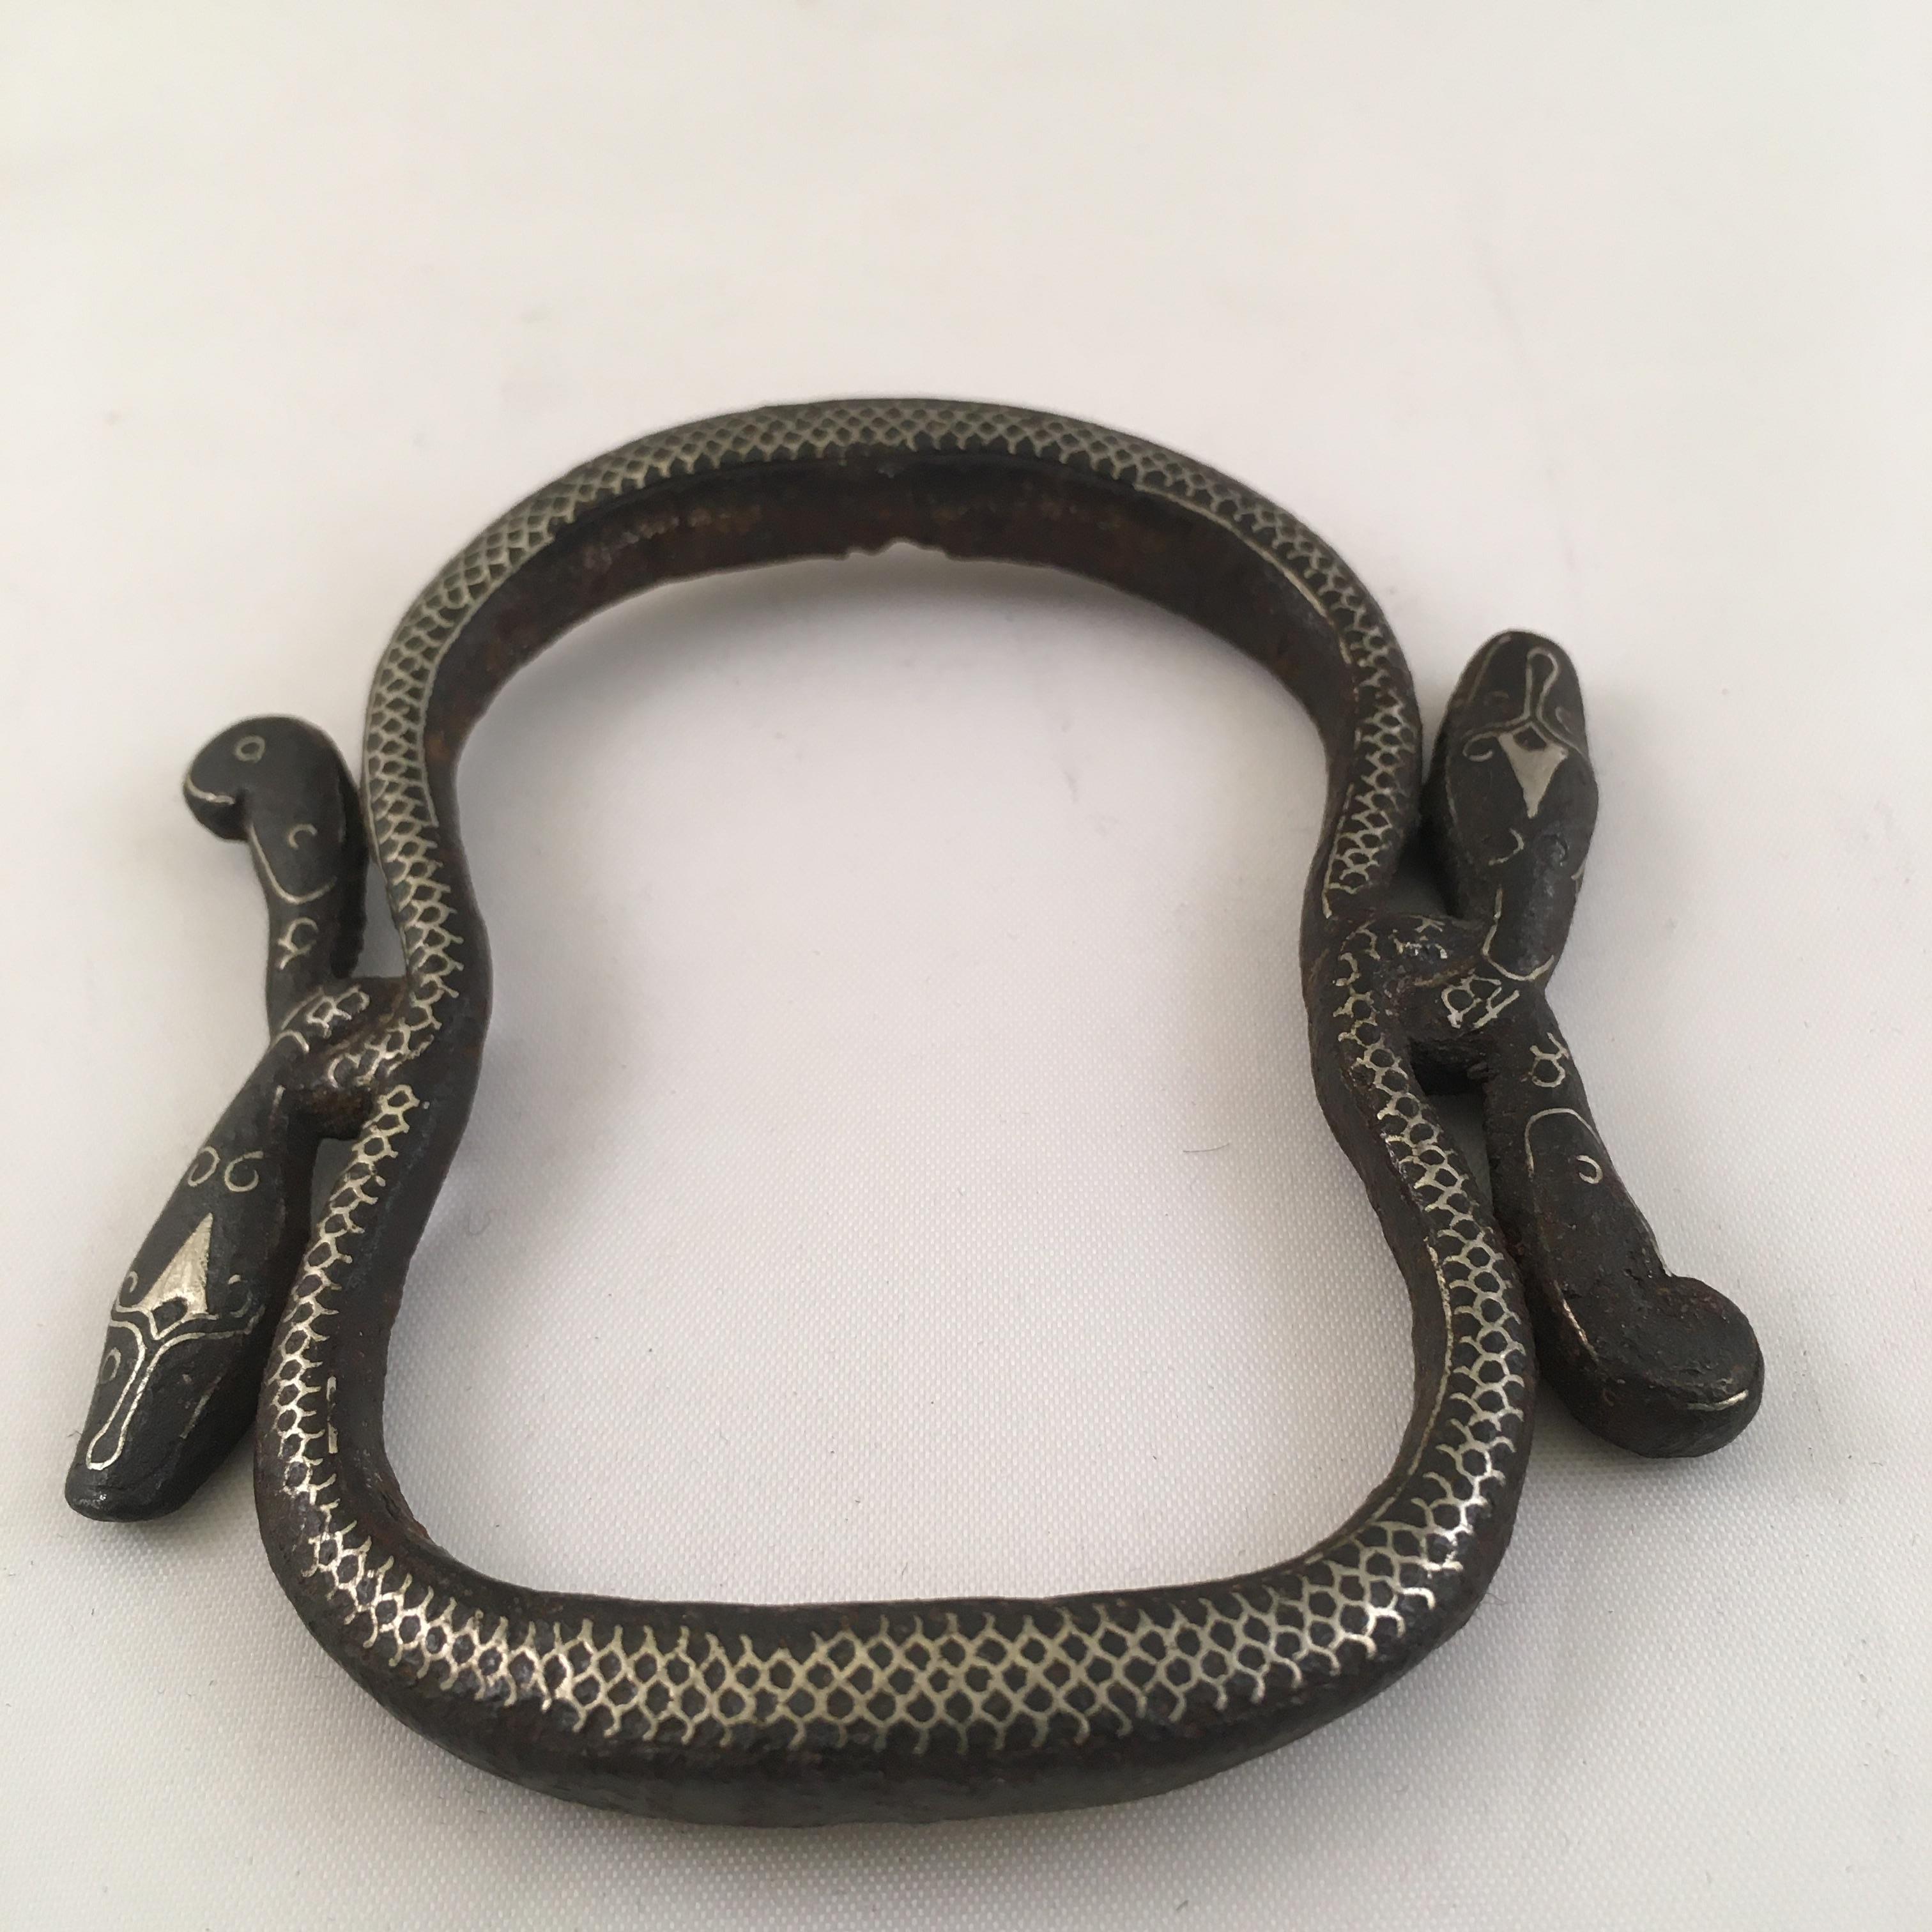 19th Century Java Surakarta Court Iron/Silver Inlay Snake Belt, Buckle and Slid For Sale 5